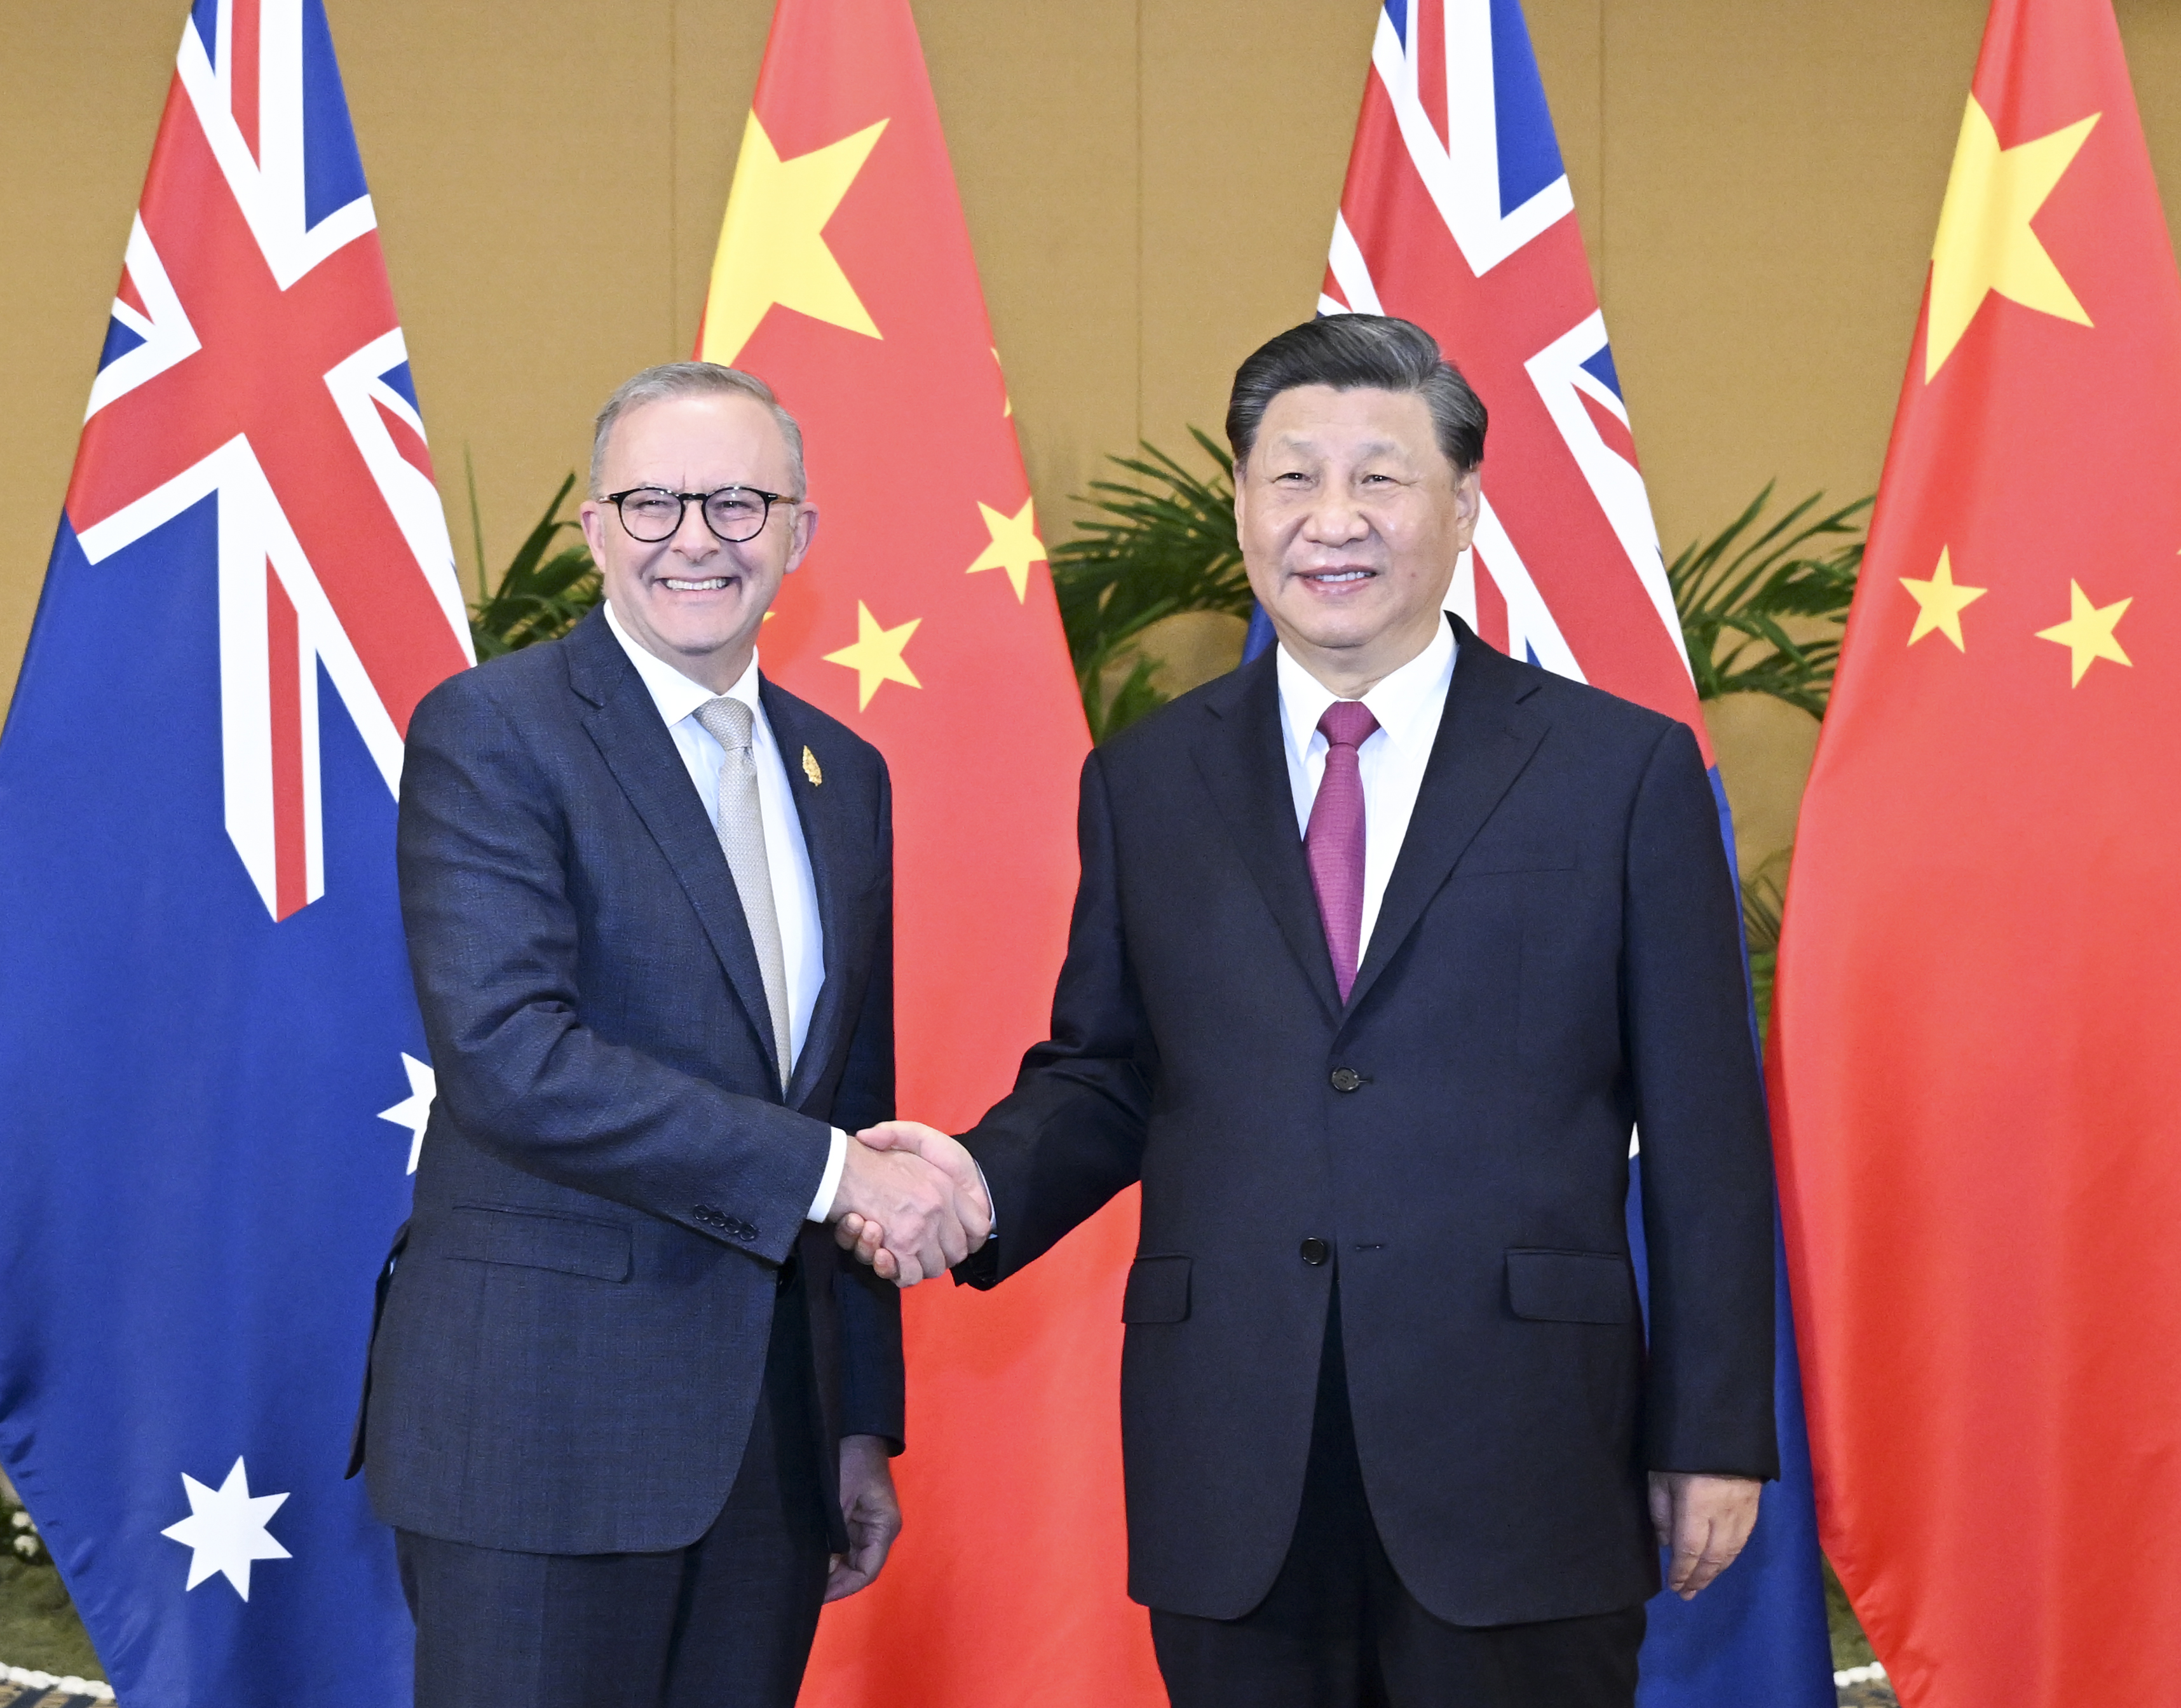 Hua Chunying 华春莹 on Twitter: "President Xi Jinping met with Australian Prime Minister Anthony Albanese. President Xi said that in the past few years, China-Australia relations have encountered difficulties, which is the